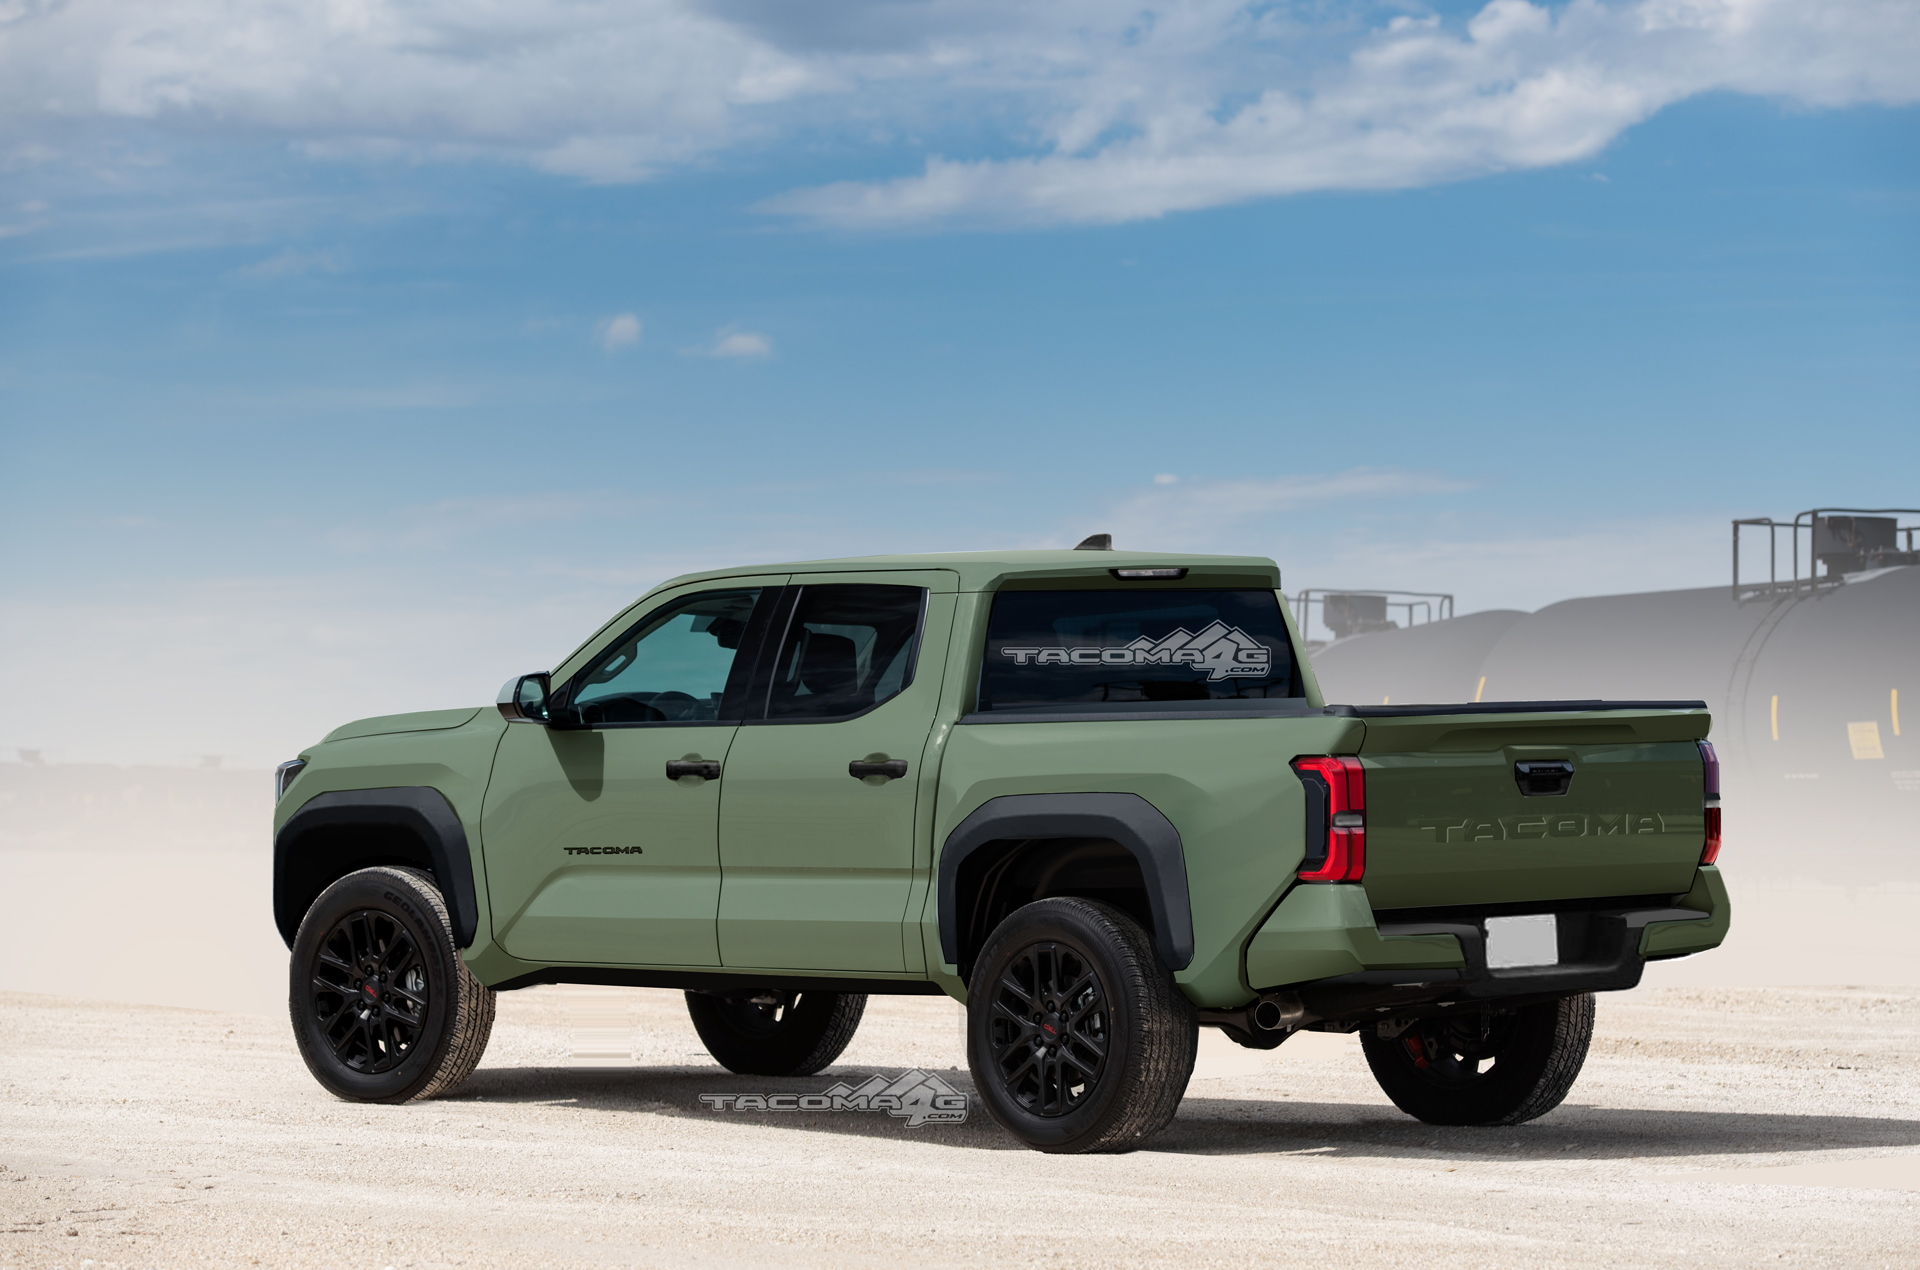 2024 Tacoma Our 2024 Toyota Tacoma TRD PRO Preview Renderings! Tacoma-2023-rear-Green1